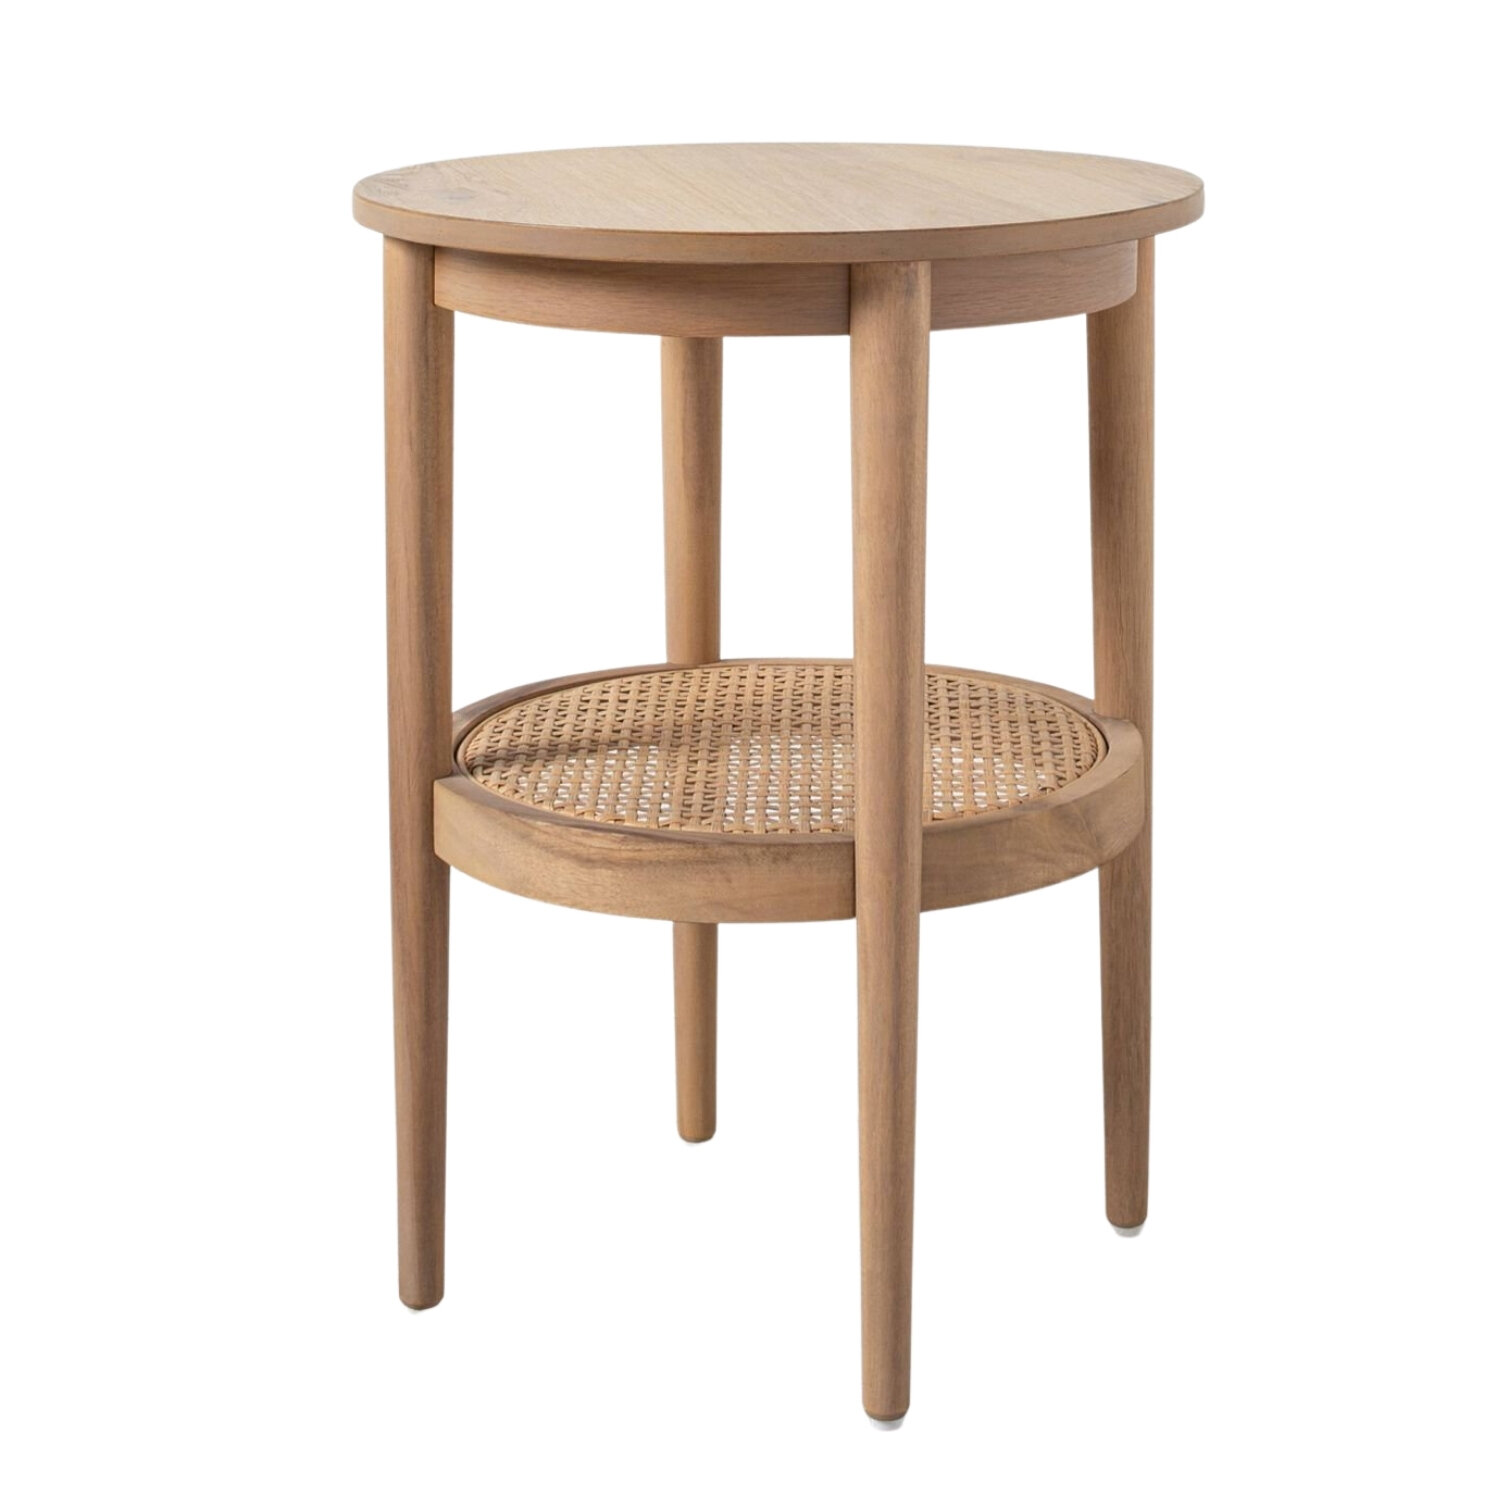 Wood &amp; Cane Accent Table, Target, $99.99